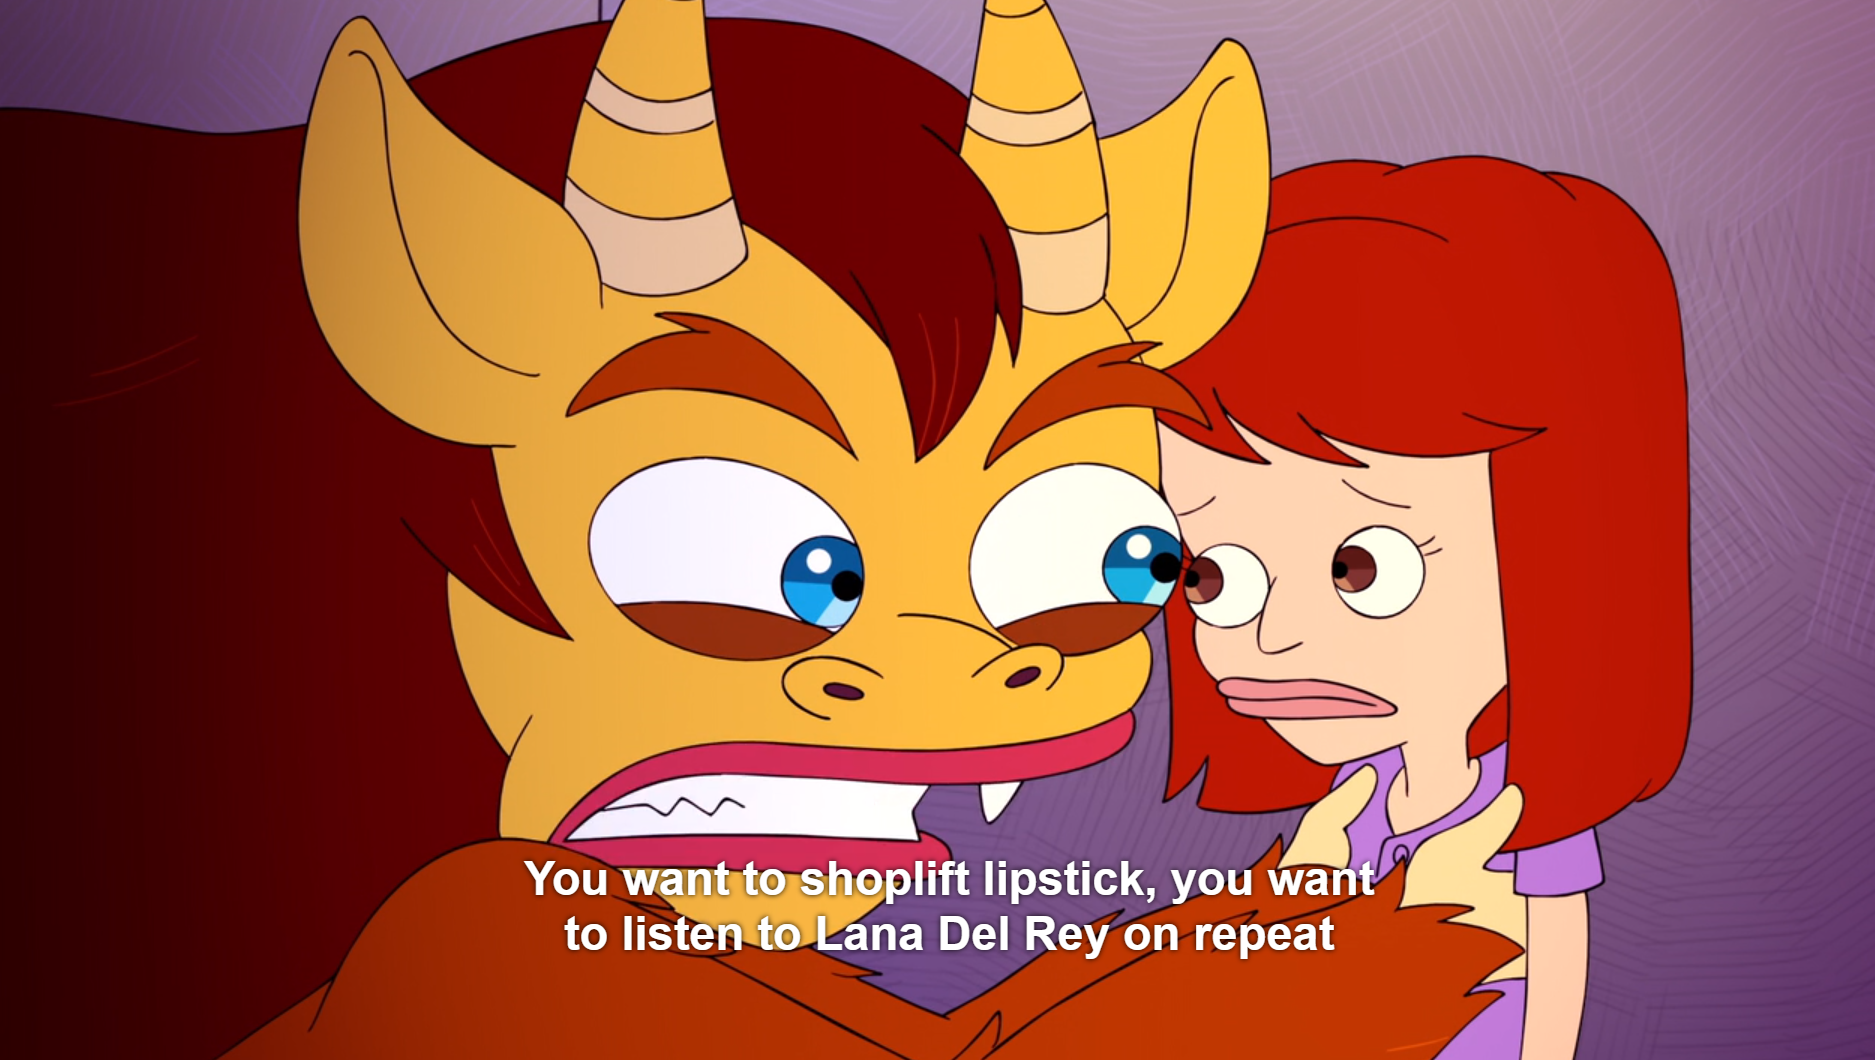 Any of you guys watch Big Mouth on Netflix? : lanadelrey